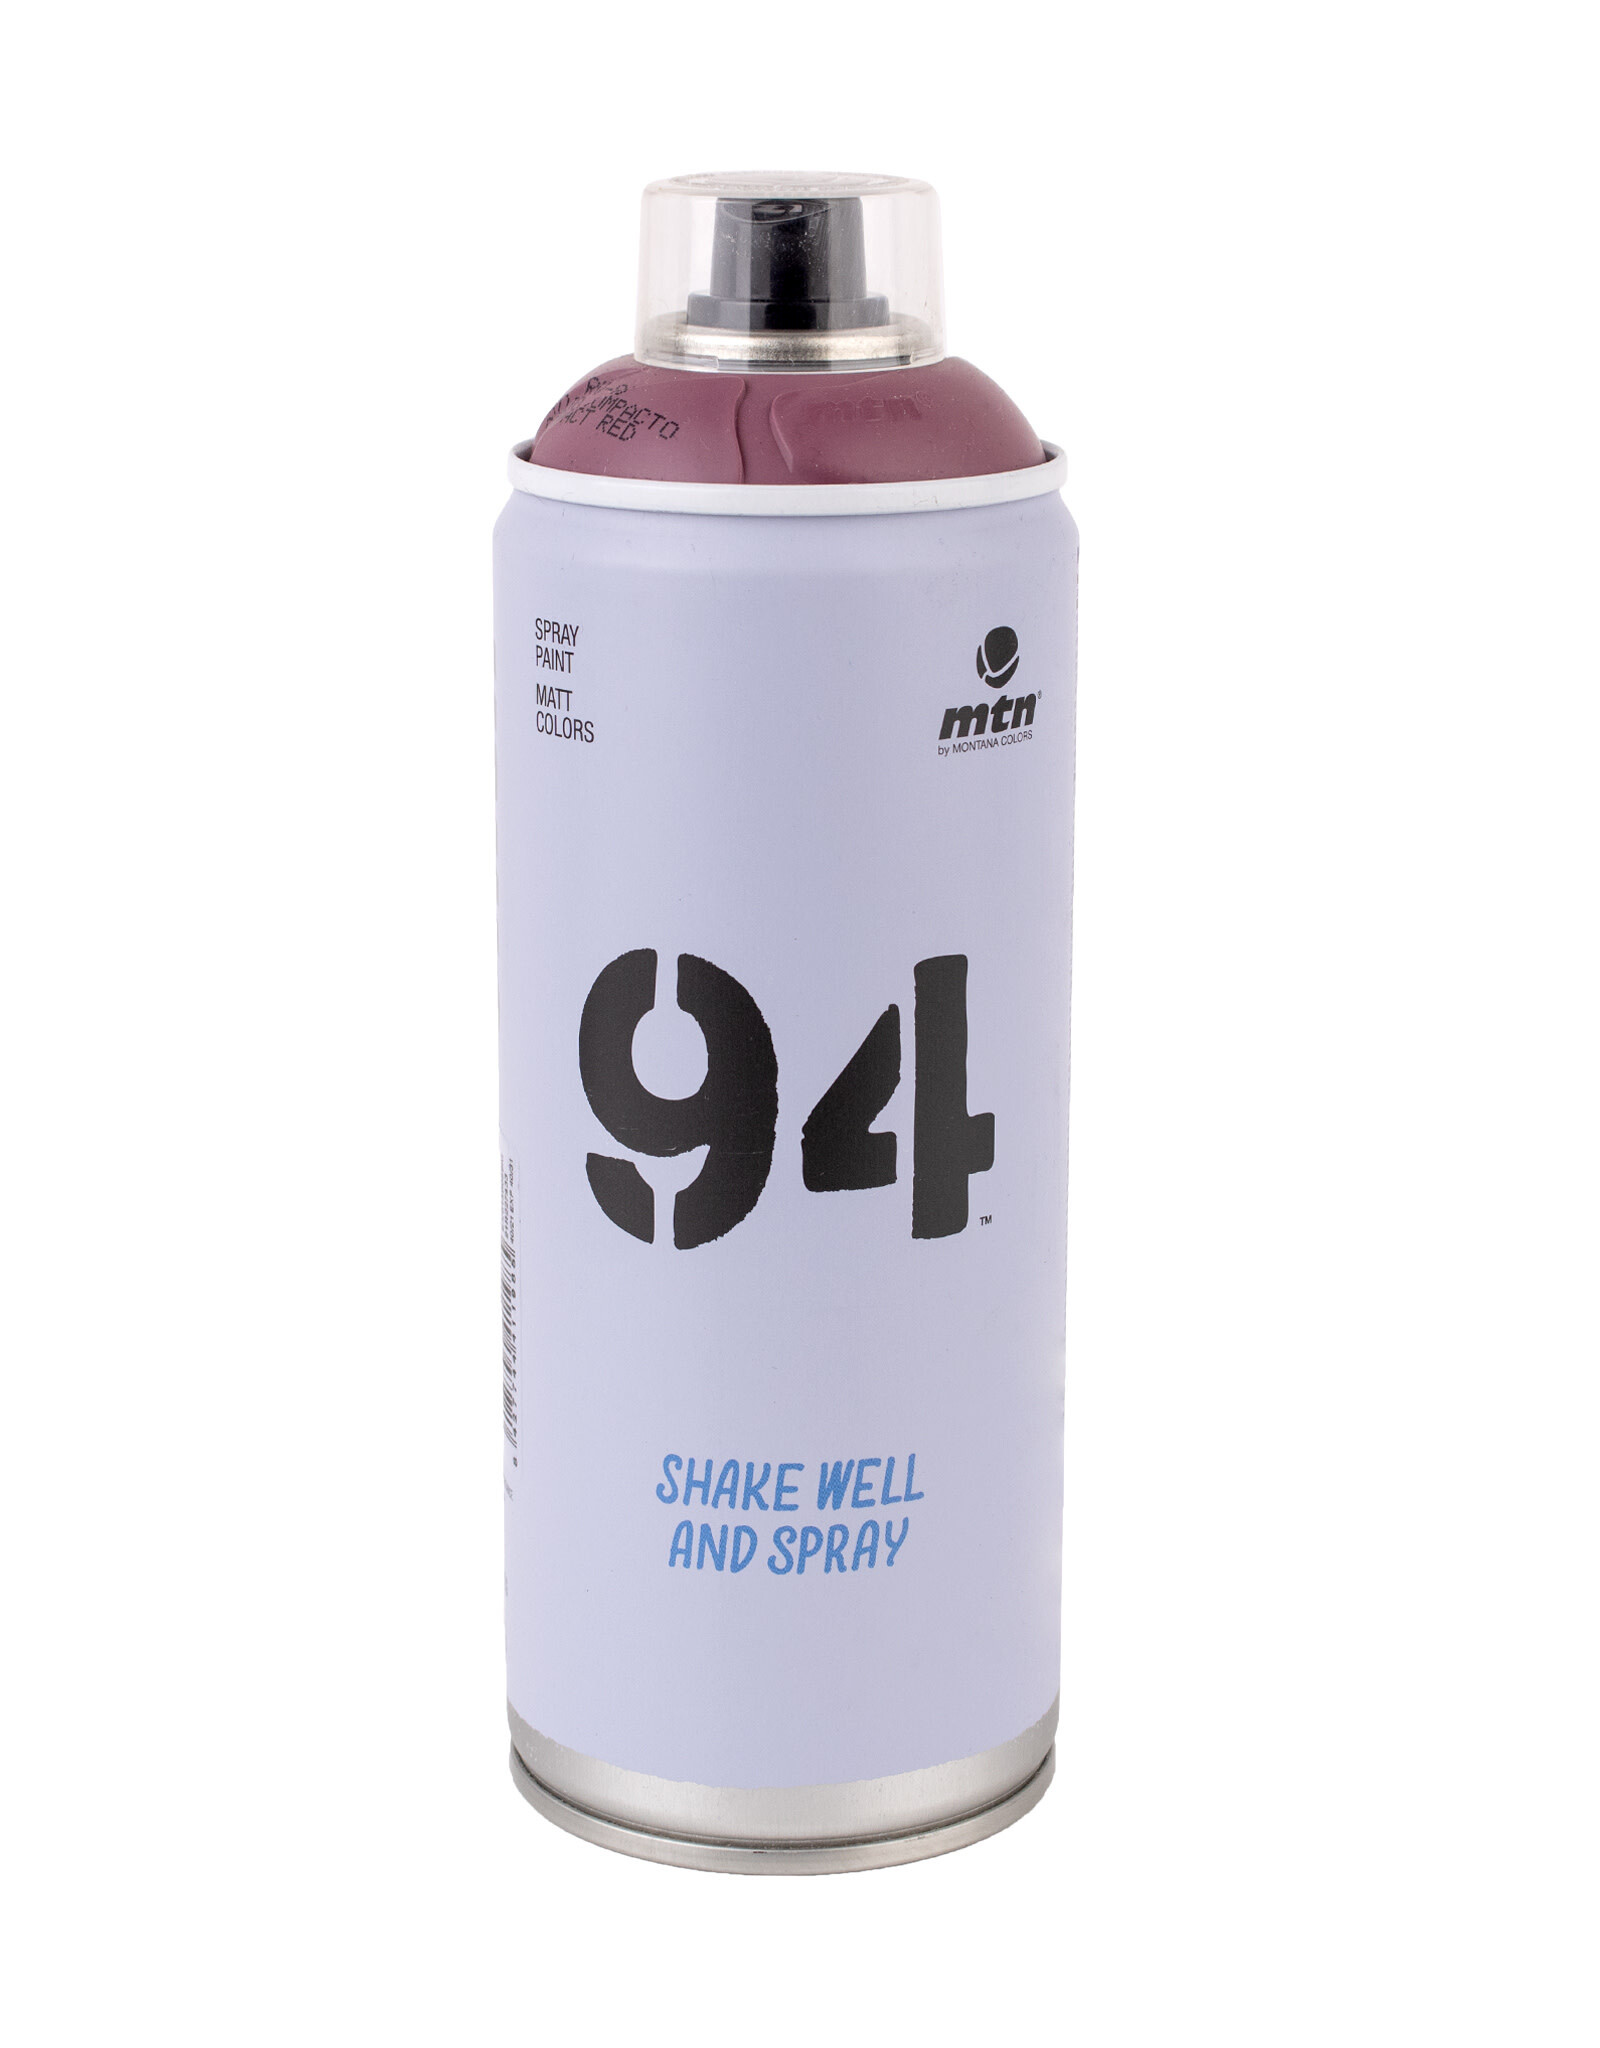 mtn 94 MTN94, Compact Red